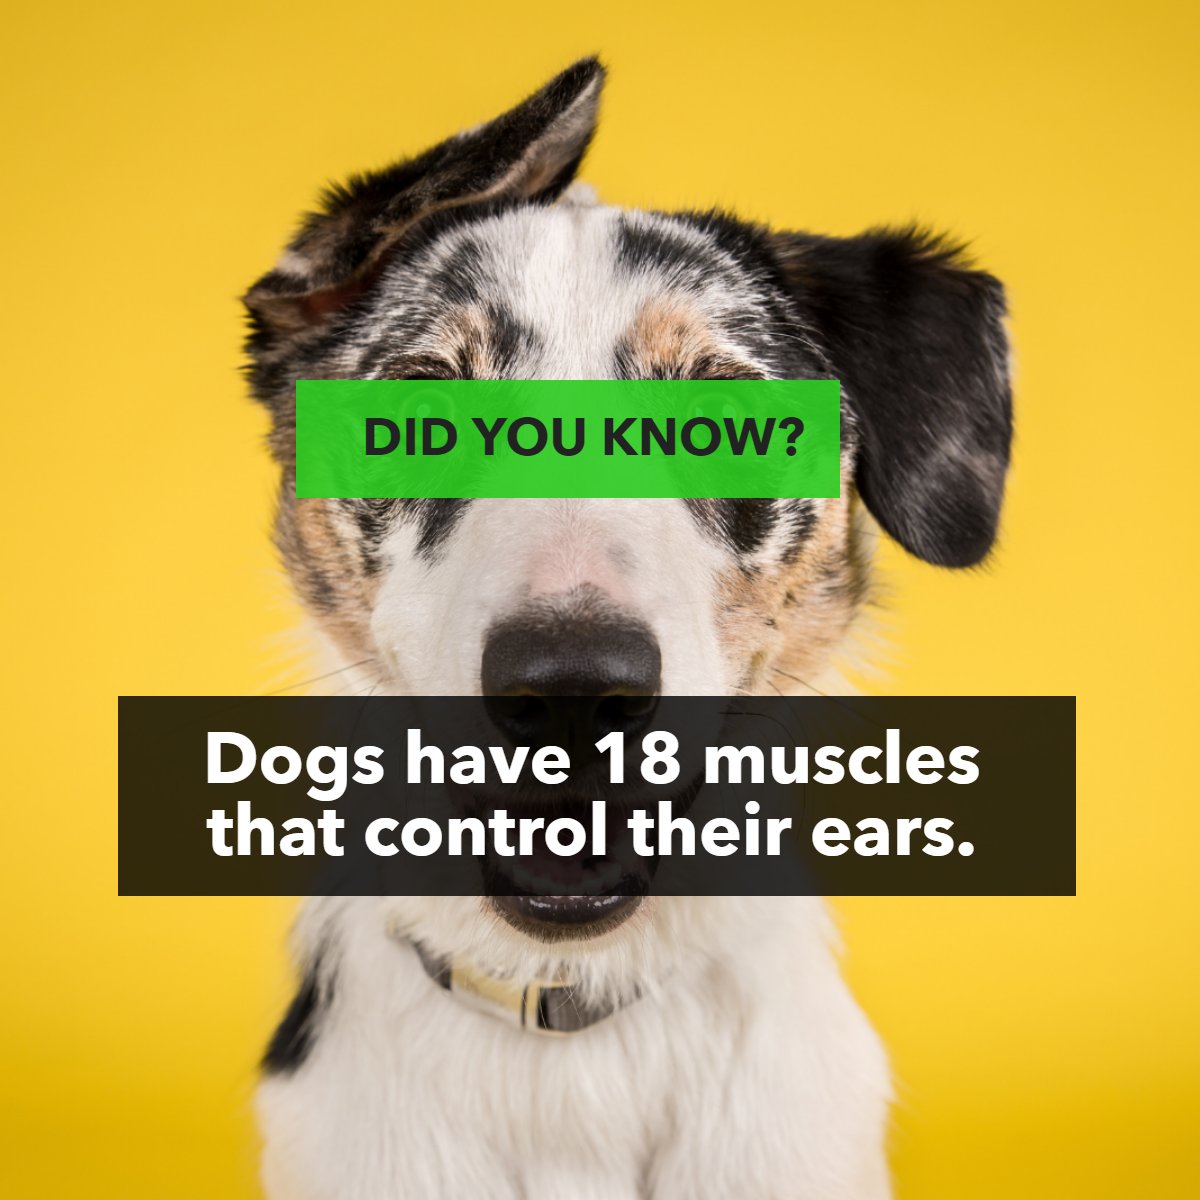 With all those muscles, is there an ear training day? 💪 😂

#funfacts #dogfact #dogfacts #dogfactsoflife
 #mkehomes #mkeliving #withyouonyourjourneyhome